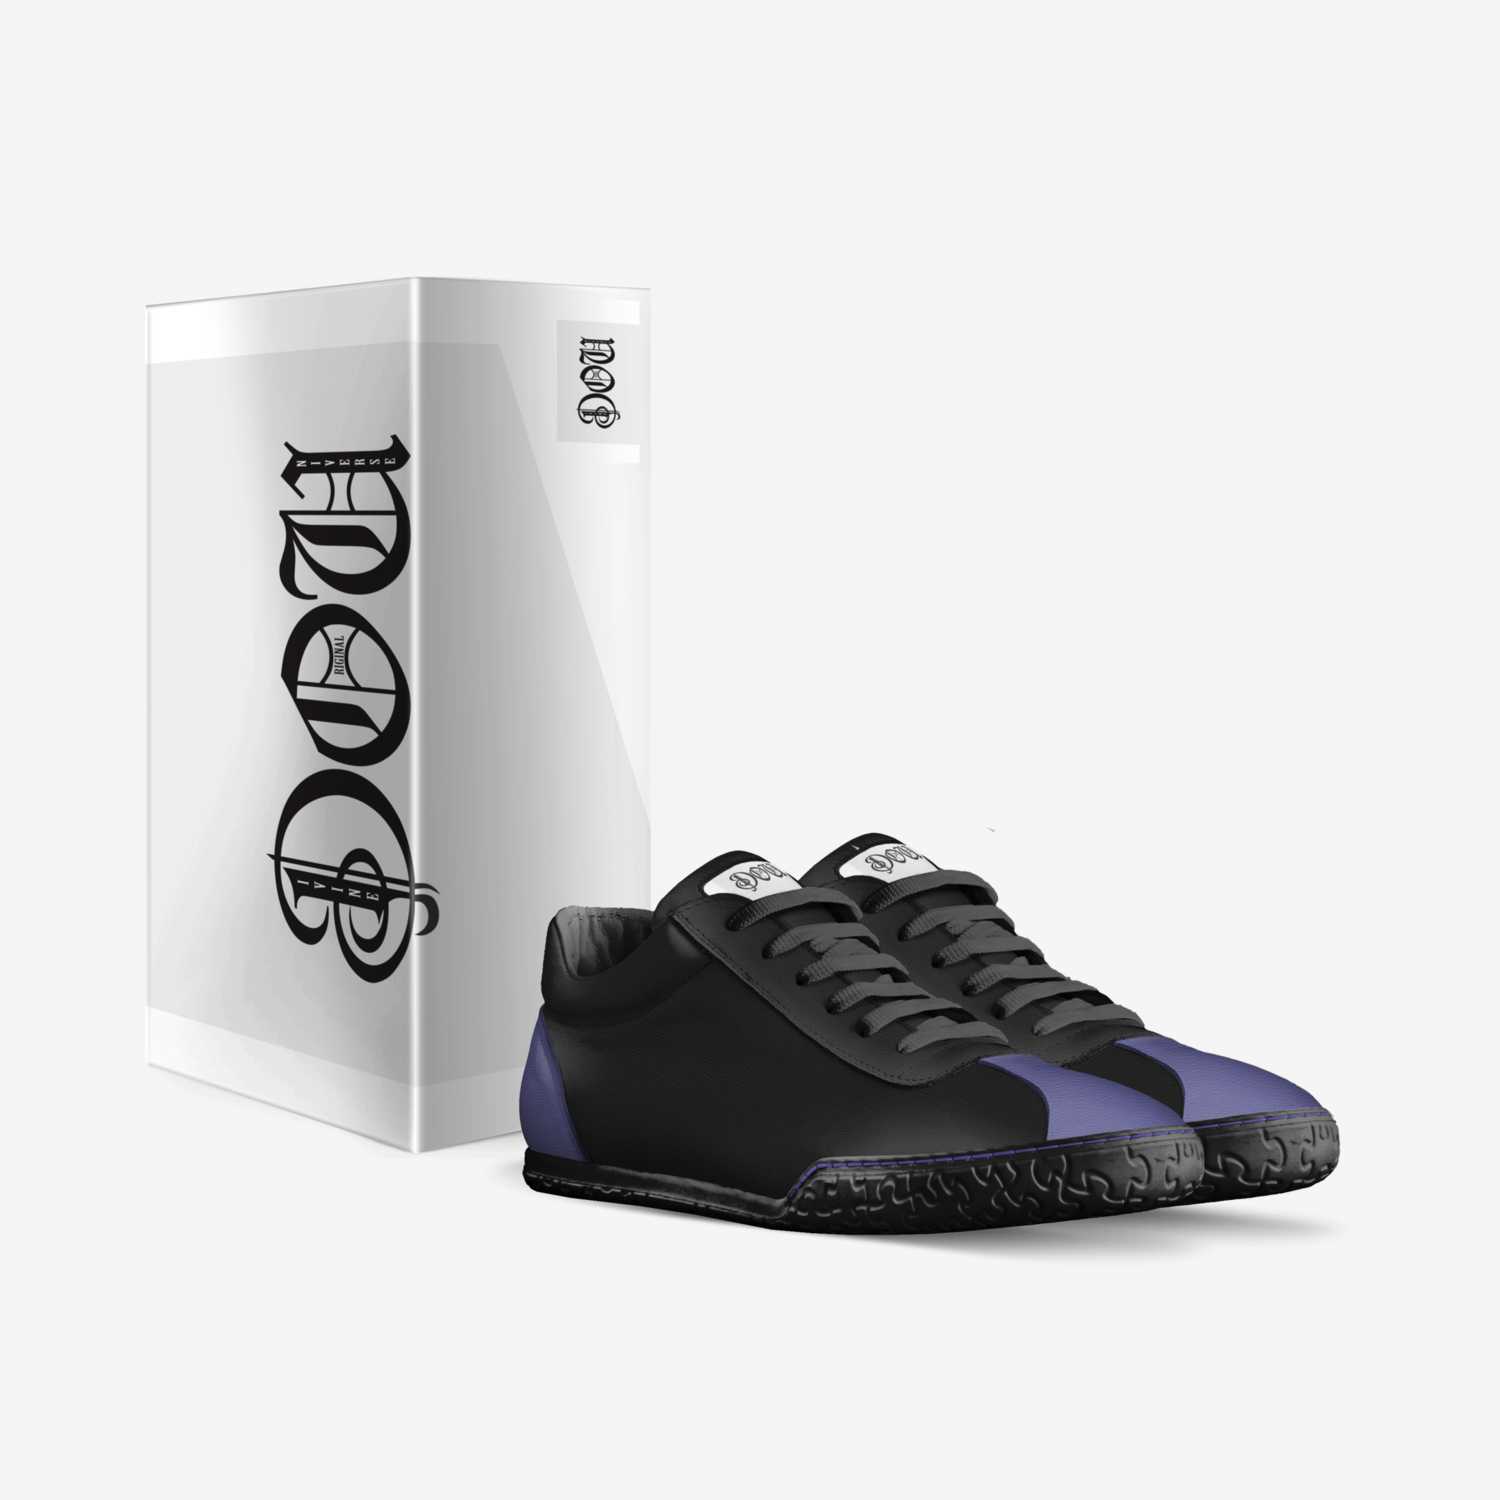 dou custom made in Italy shoes by Roy Brooks | Box view